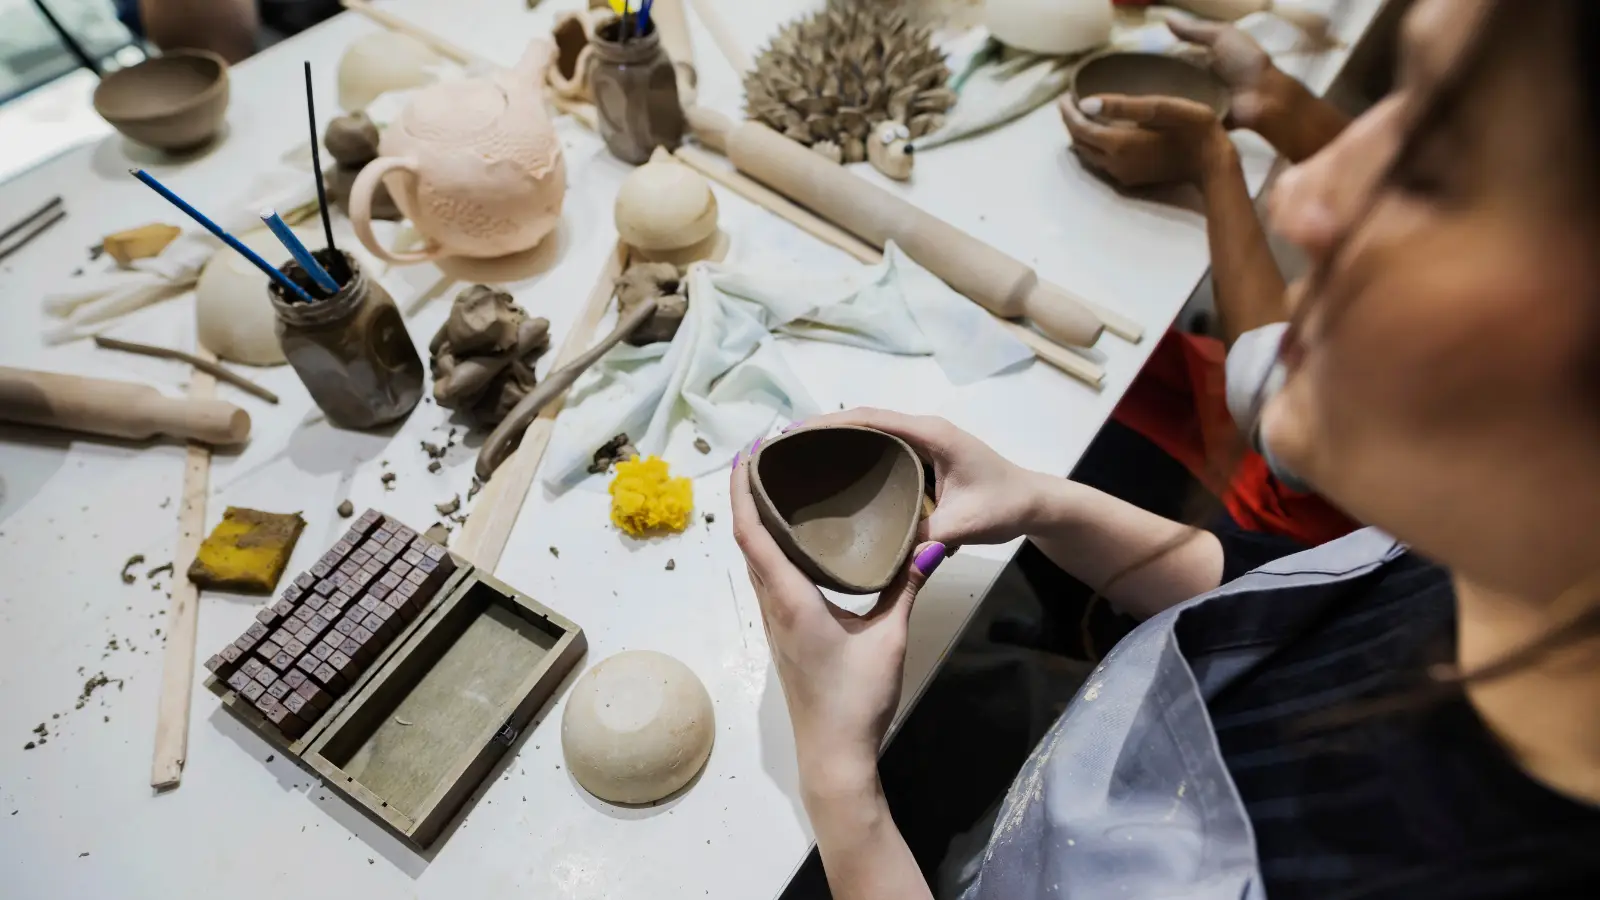 A woman sits around a table in a ceramics class. On the table are various tools used in working with pottery and she holds an unfired triangular pot in her hands.